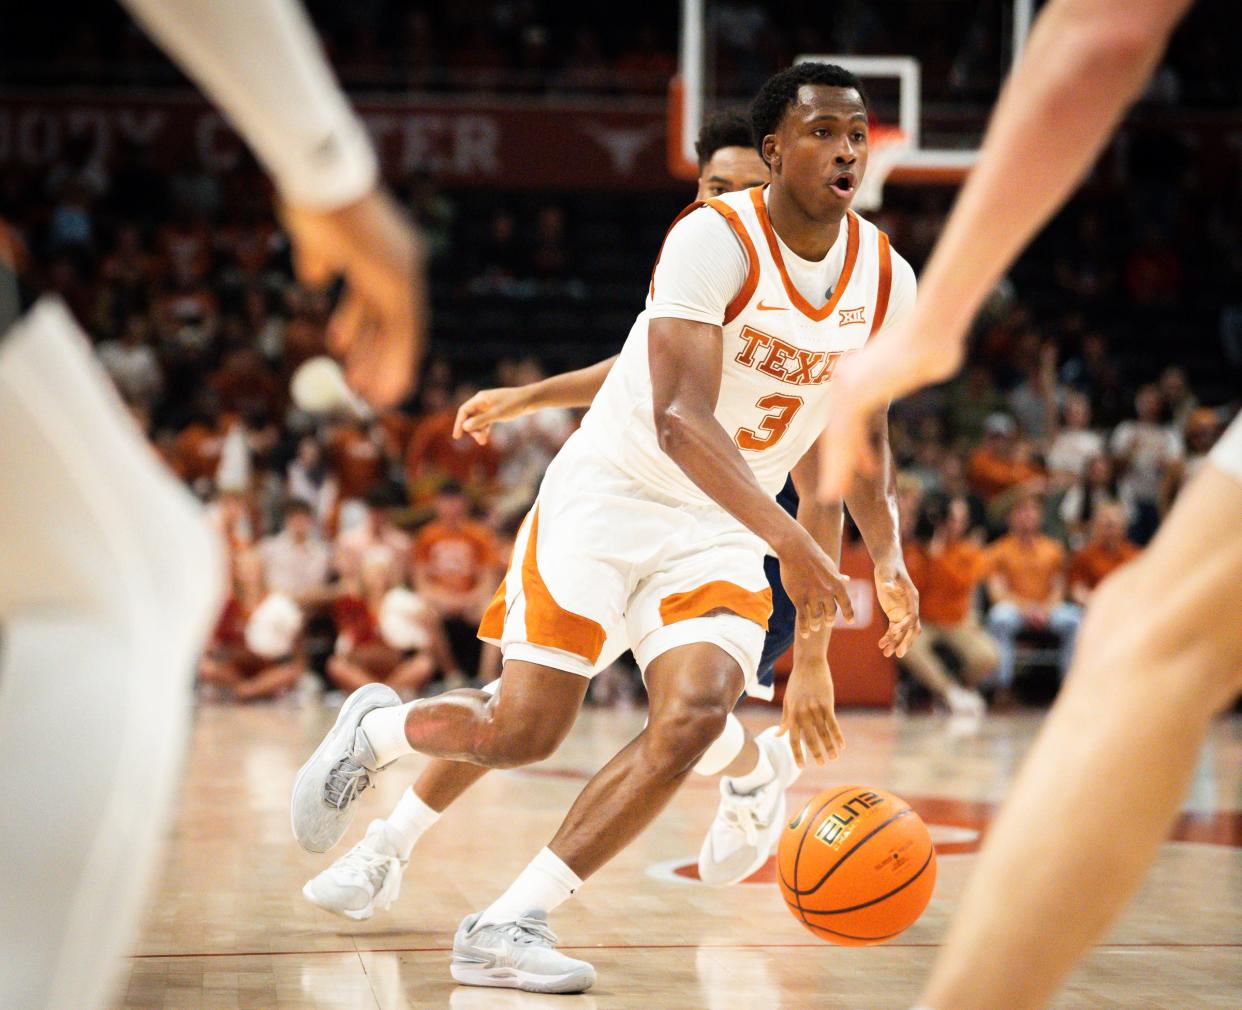 Texas guard Max Abmas brings the ball down the court in a win over Rice earlier this season. Abmas picked up his second Big 12 newcomer of the week honor Monday after a week that included a season-high 32 points in a loss to West Virginia on Saturday.